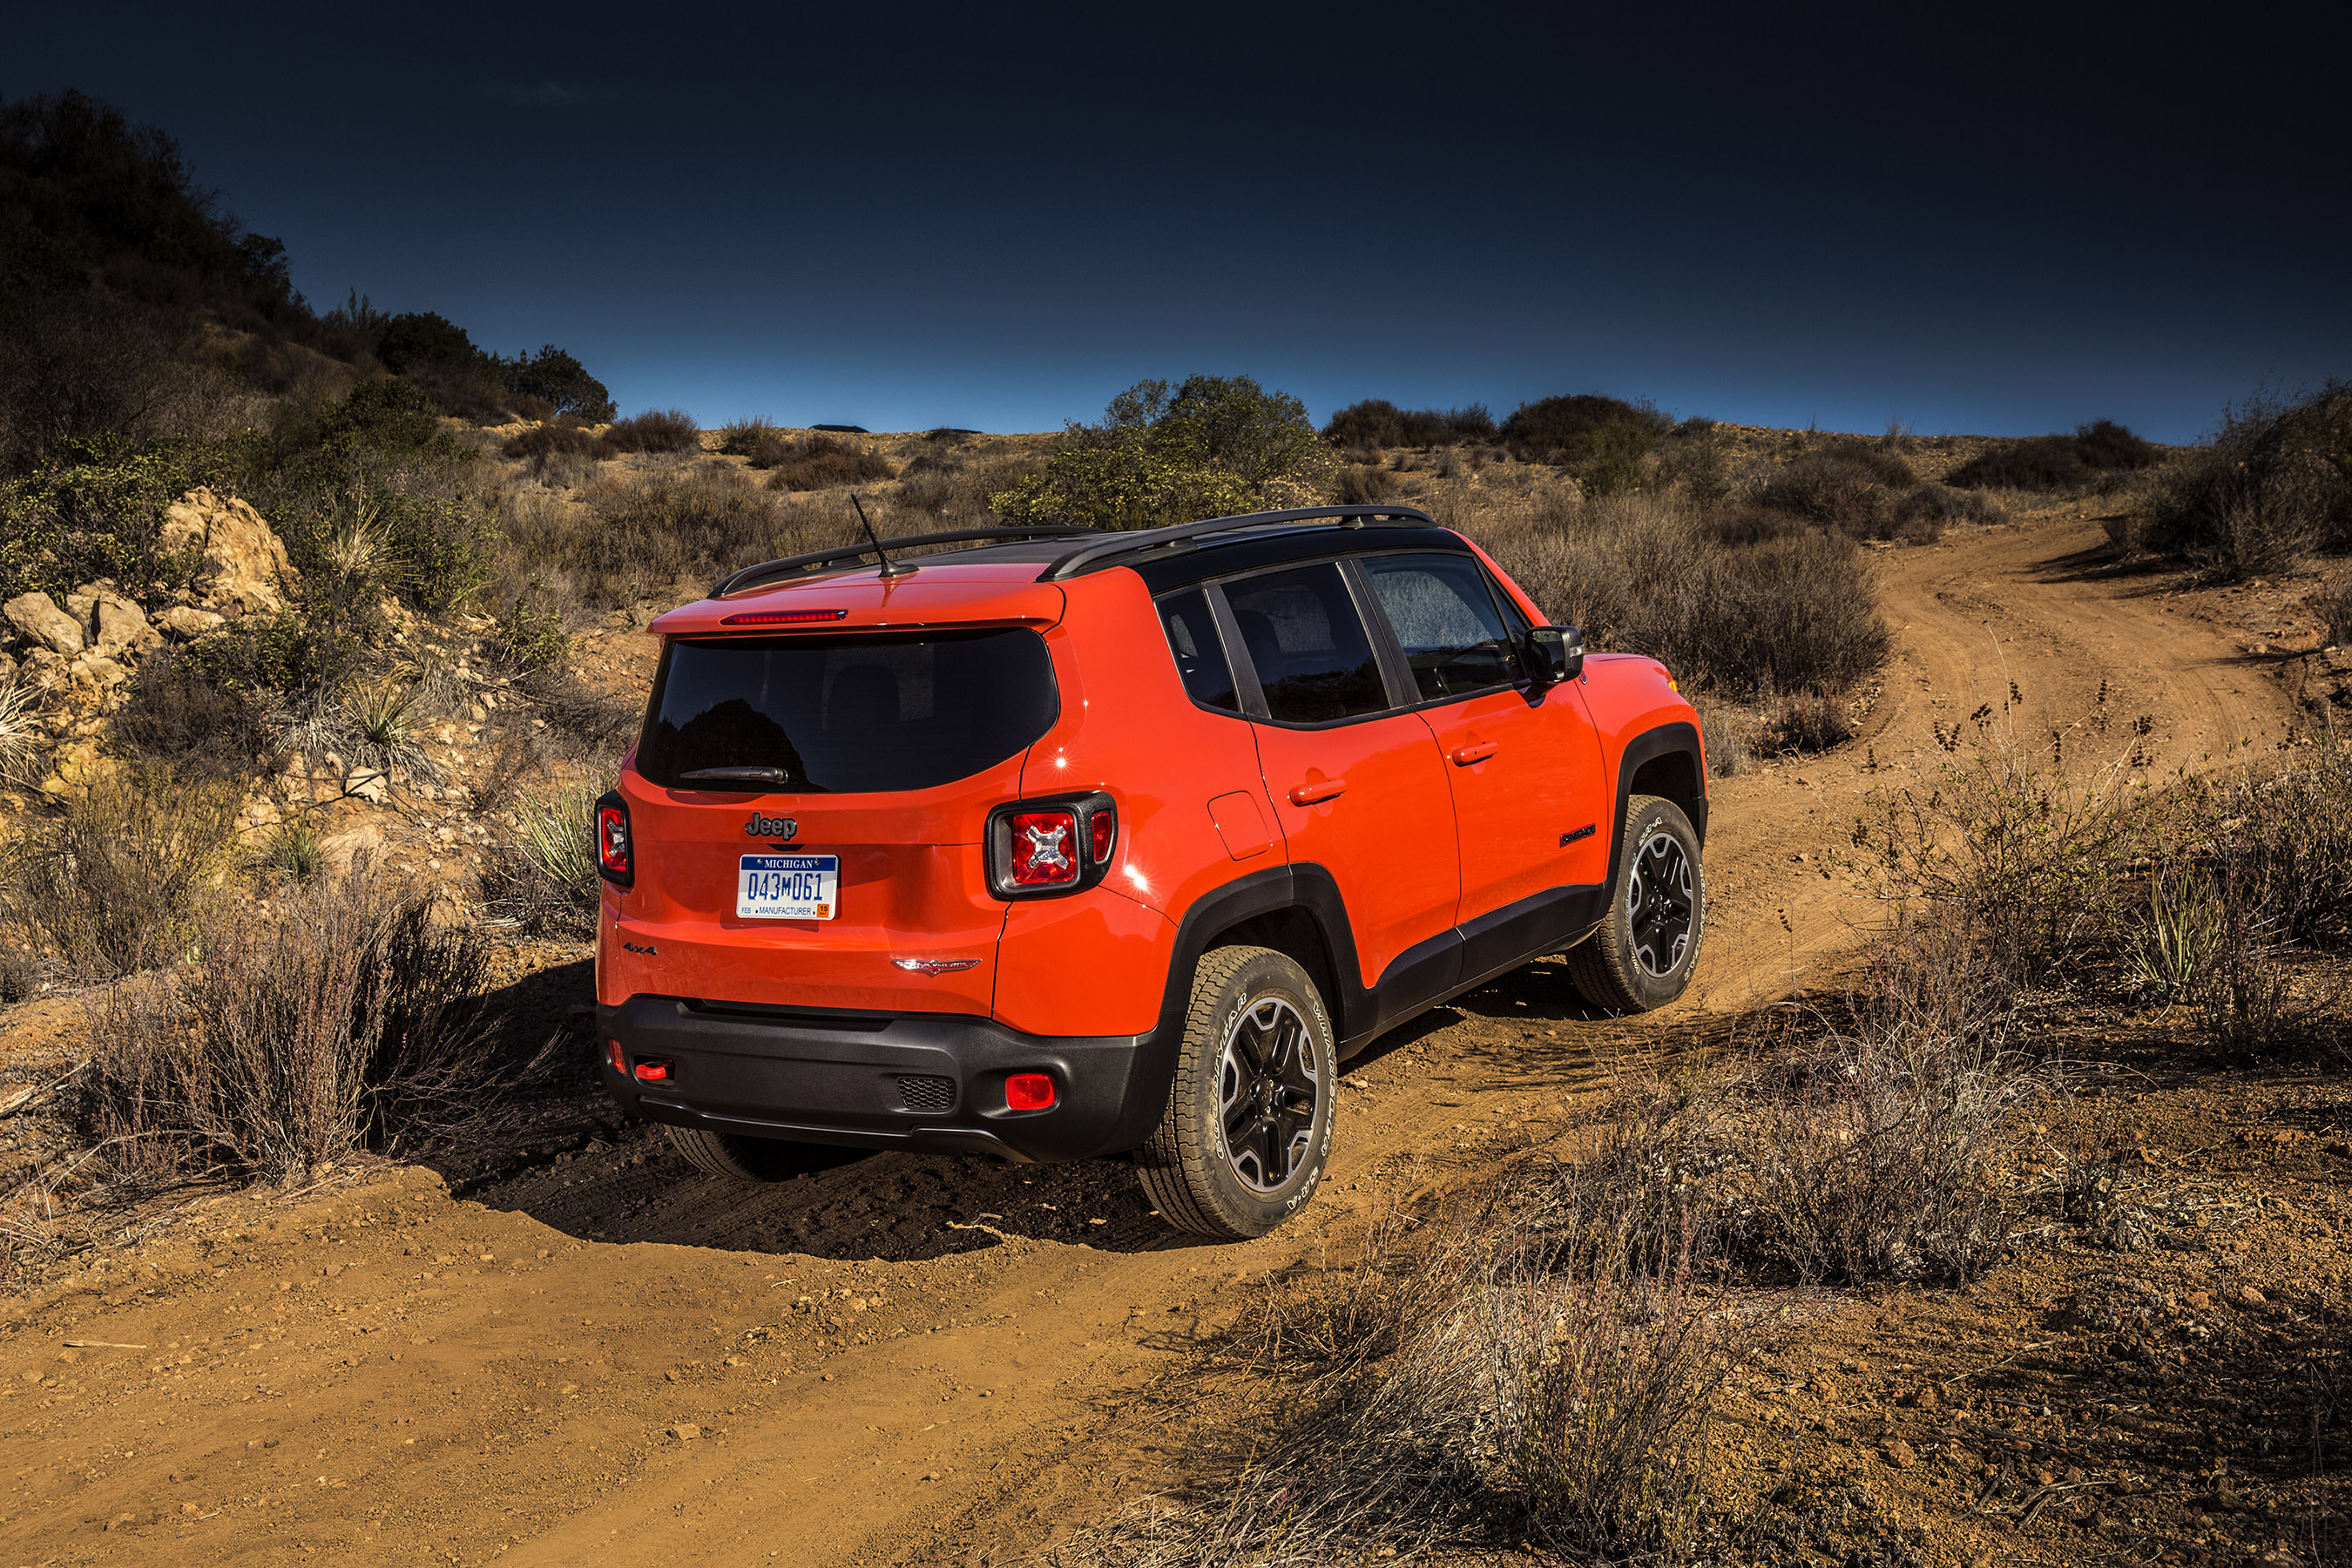 KBB.com 10 Coolest Cars: For those who believe the grass is always greener beyond the reaches of the road, the Renegade’s ability & attitude qualify it as the coolest way to get there for sub-$18K.